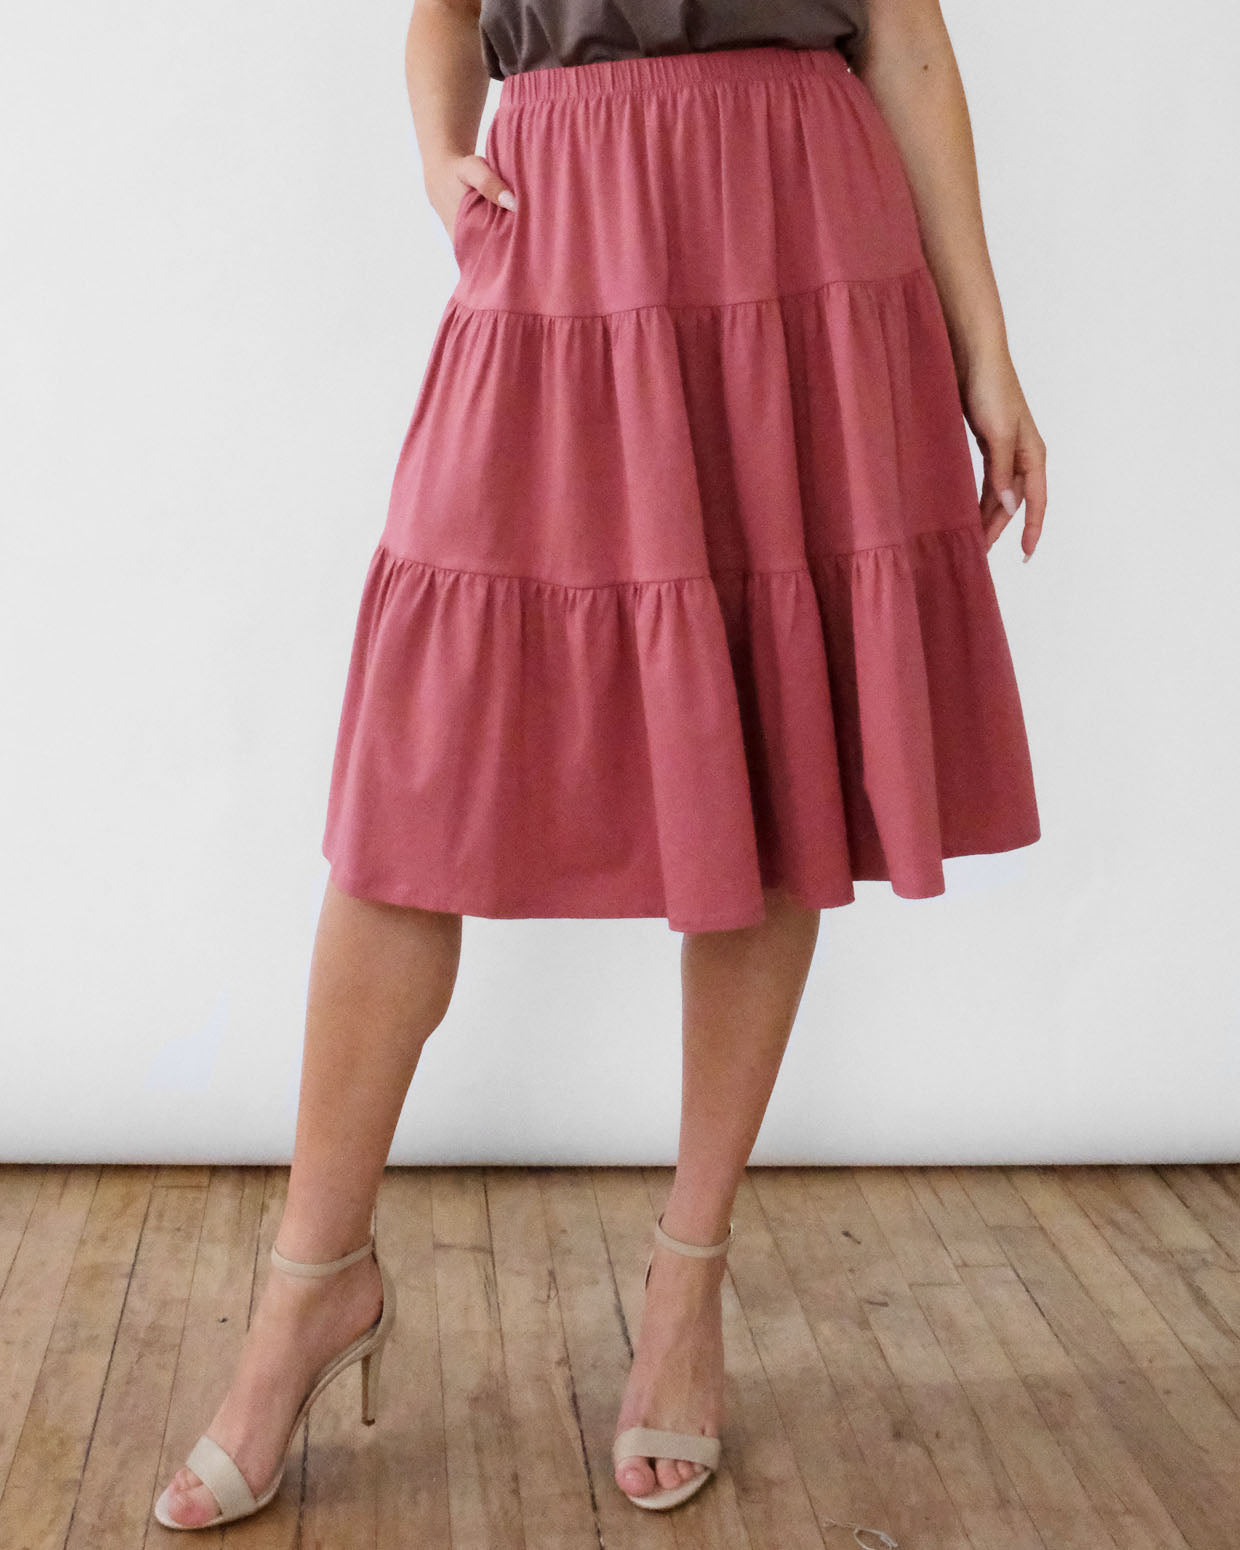 LESLIE skirt in Withered Rose